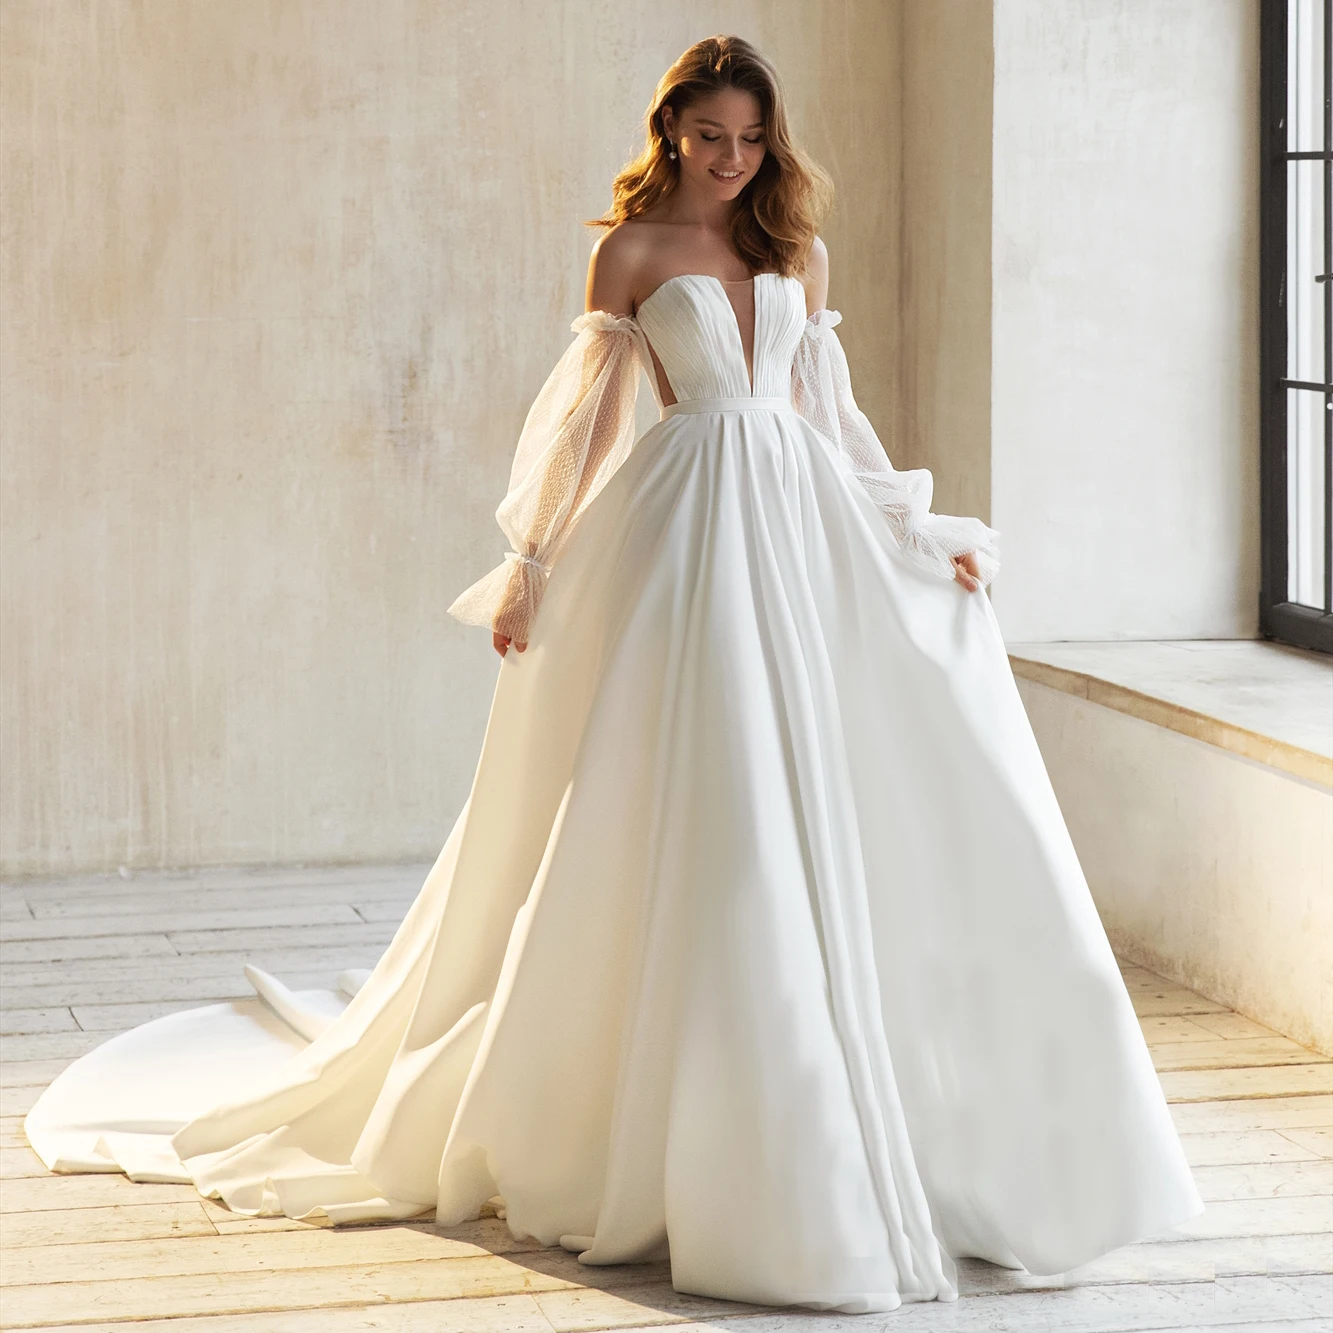 T242022_Alluring Romantic Tulle Mermaid Gown with Strapless Sweetheart  Neckline and Detachable Bishop Sleeves